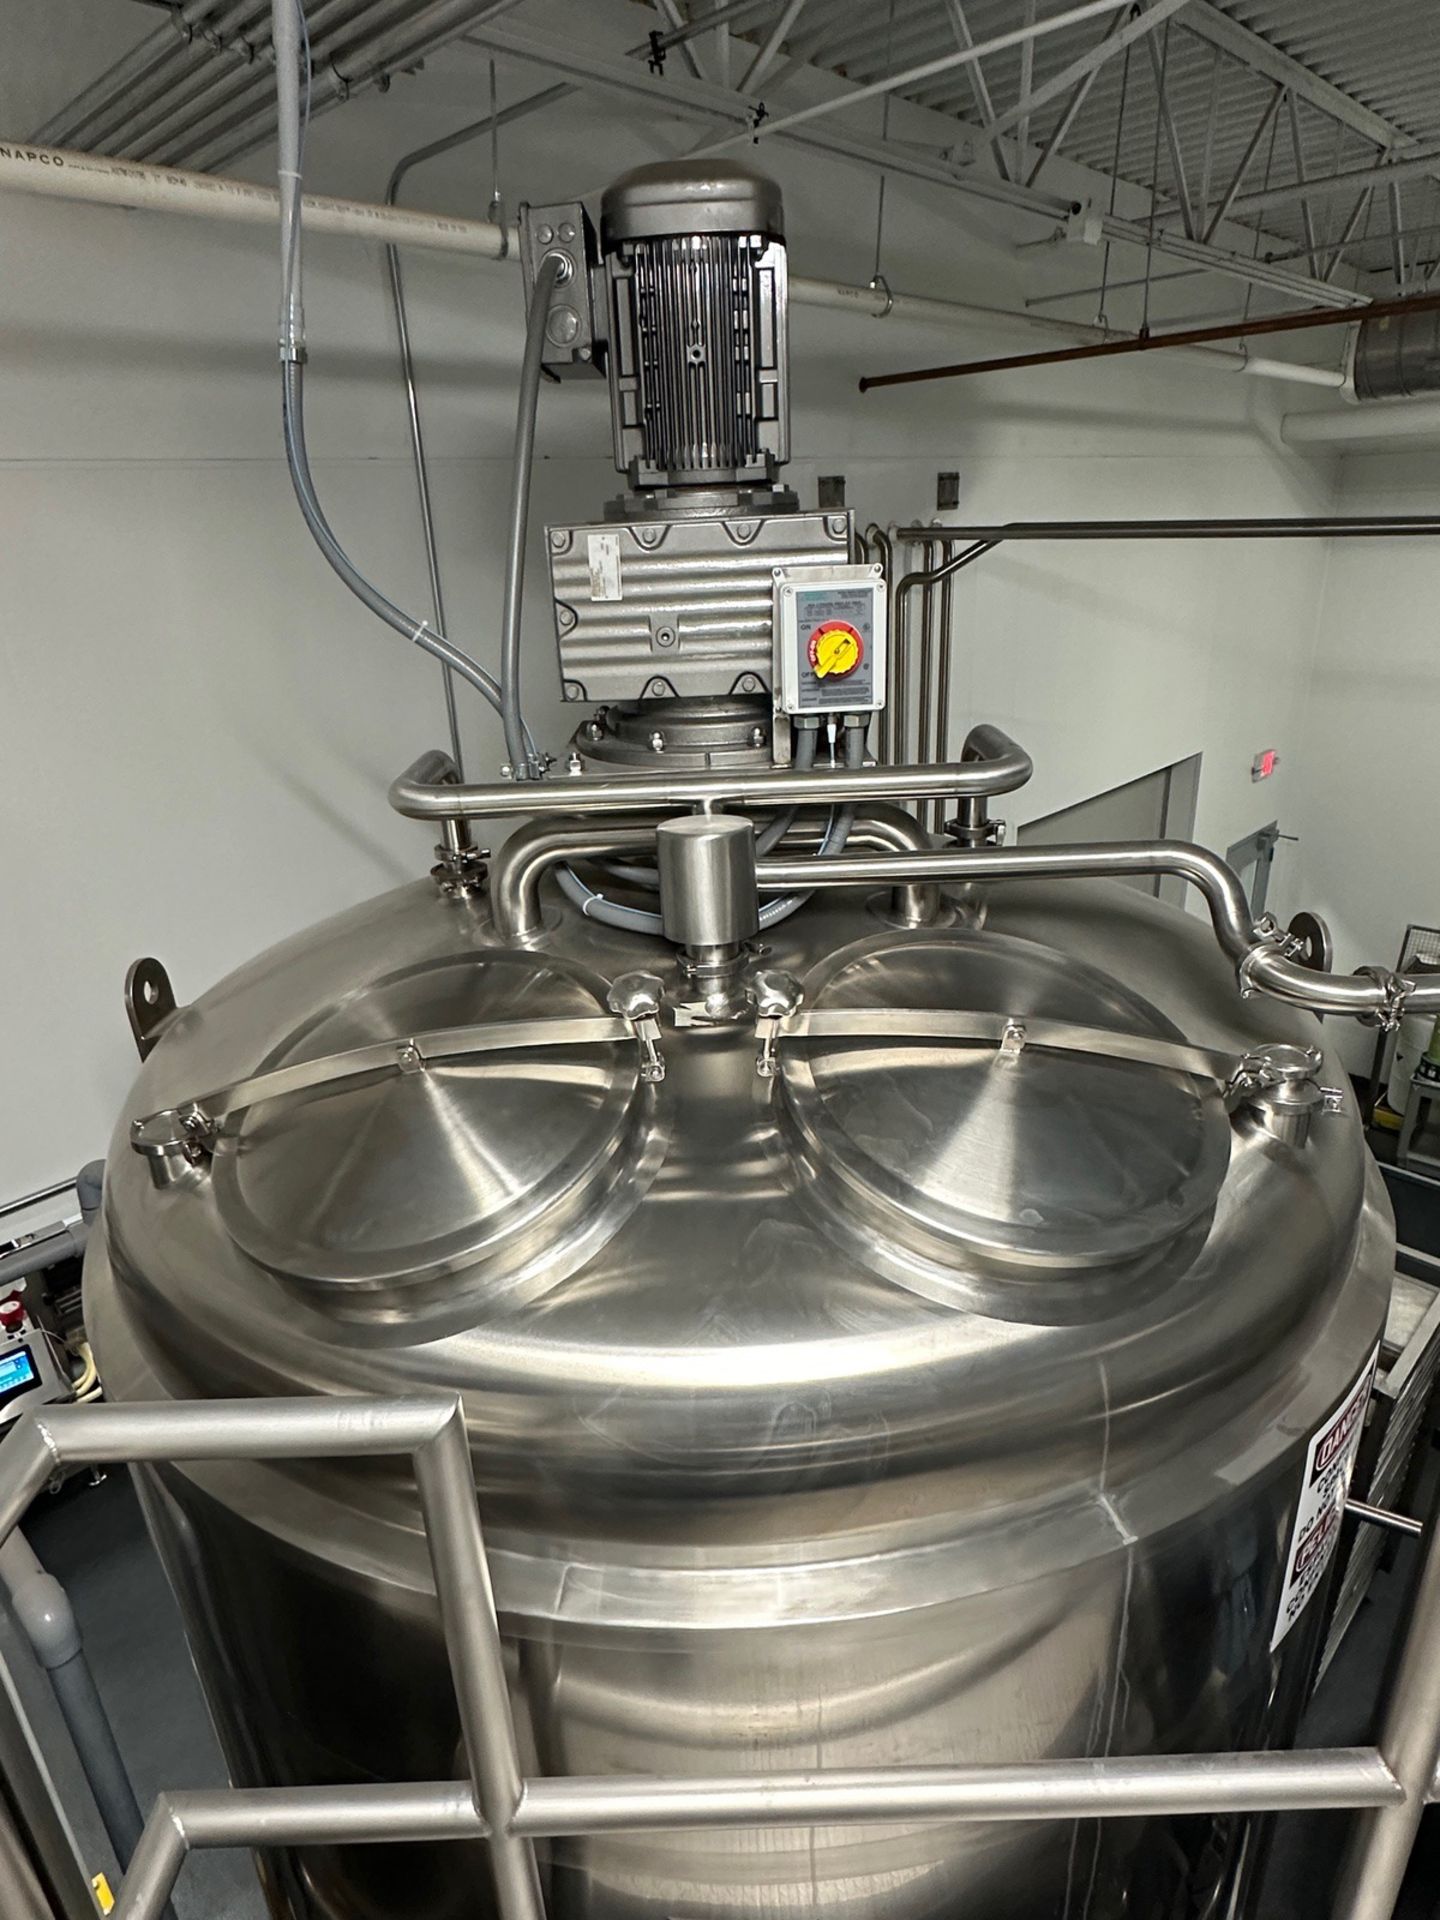 Anco 2,000 Gallon Stainless Steel Tank - Cone Bottom, Glycol Jacketed, Top Mounted Agitation with - Image 3 of 6